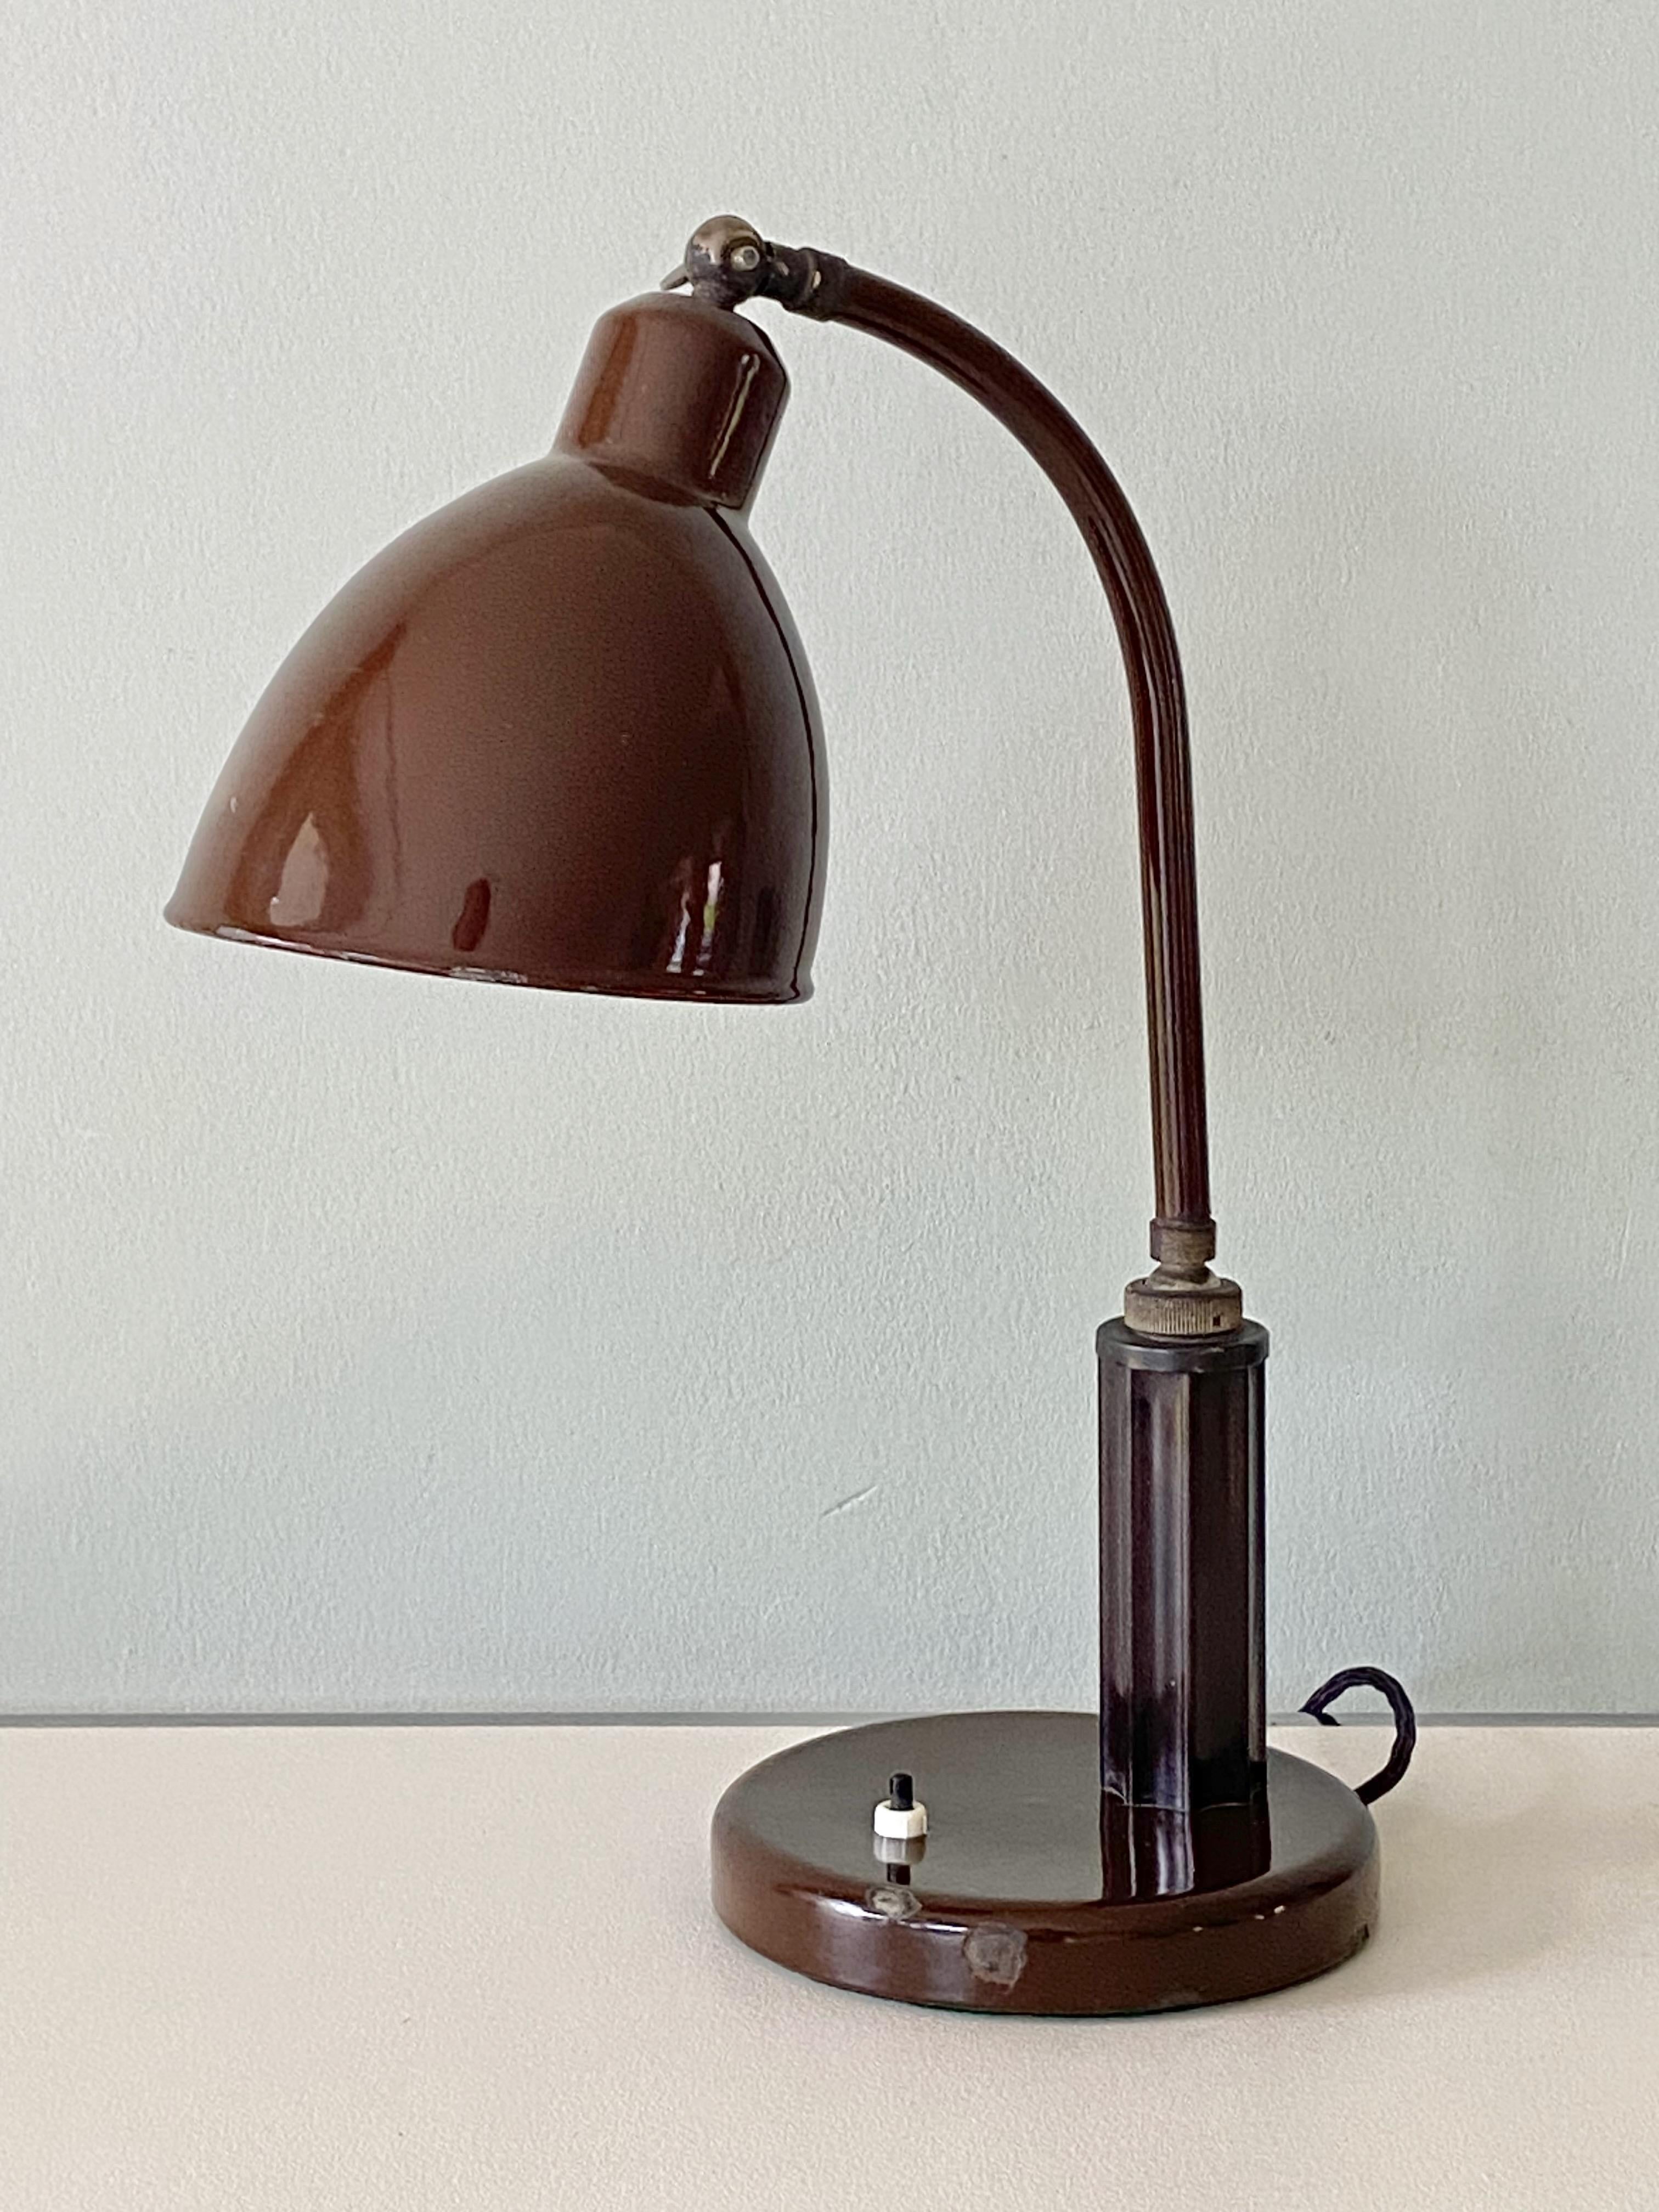 Mid-20th Century Molitor Grapholux Lamp Brown Enamel and Bakelite Stick by Christian Dell 1930s For Sale